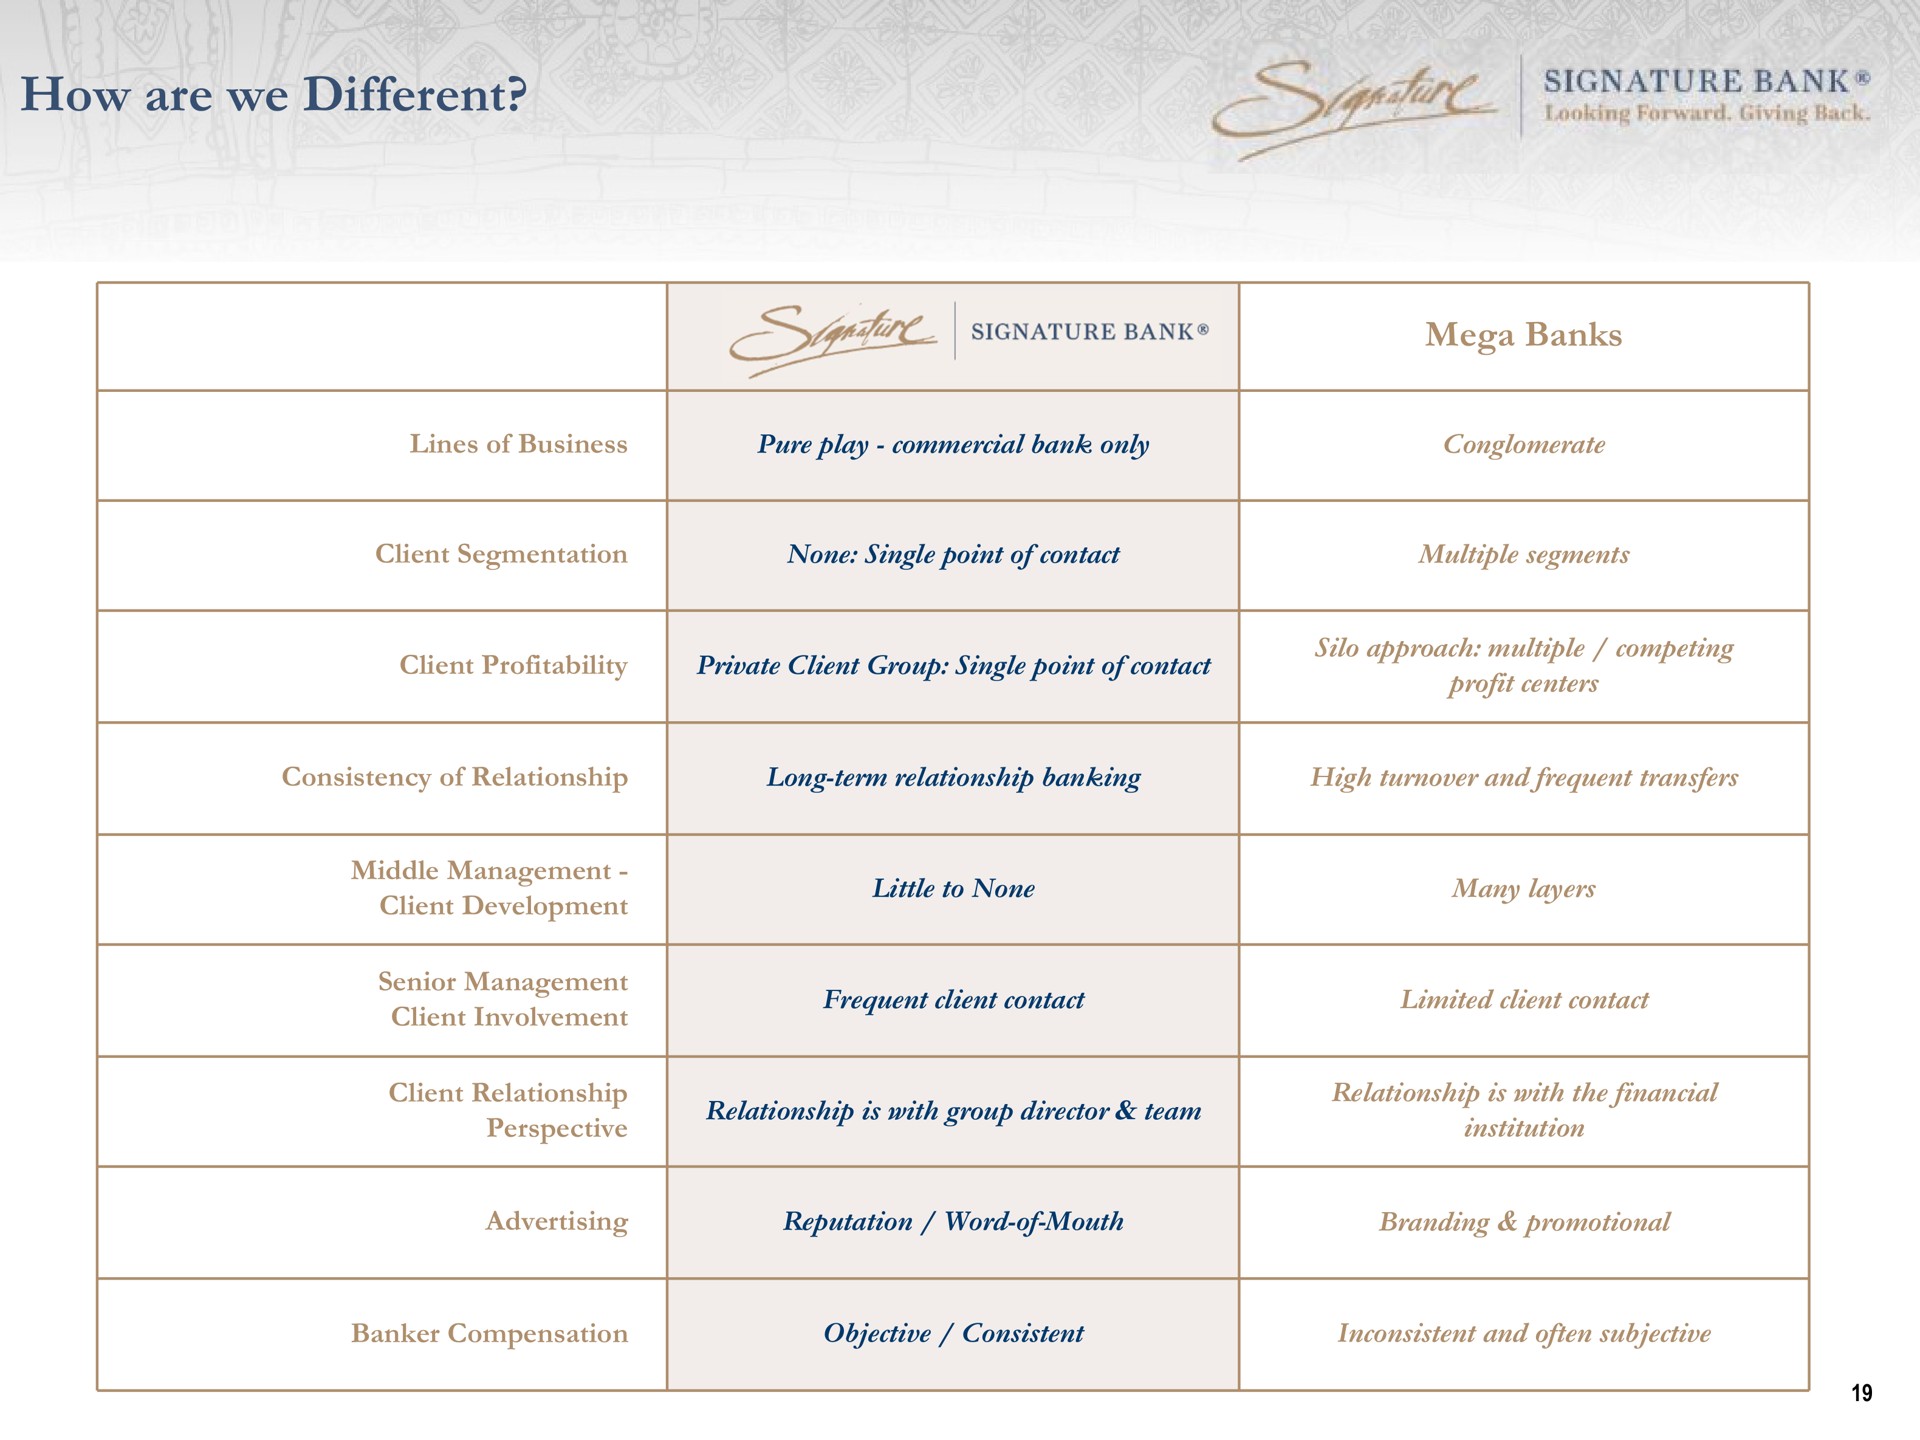 how are we different | Signature Bank